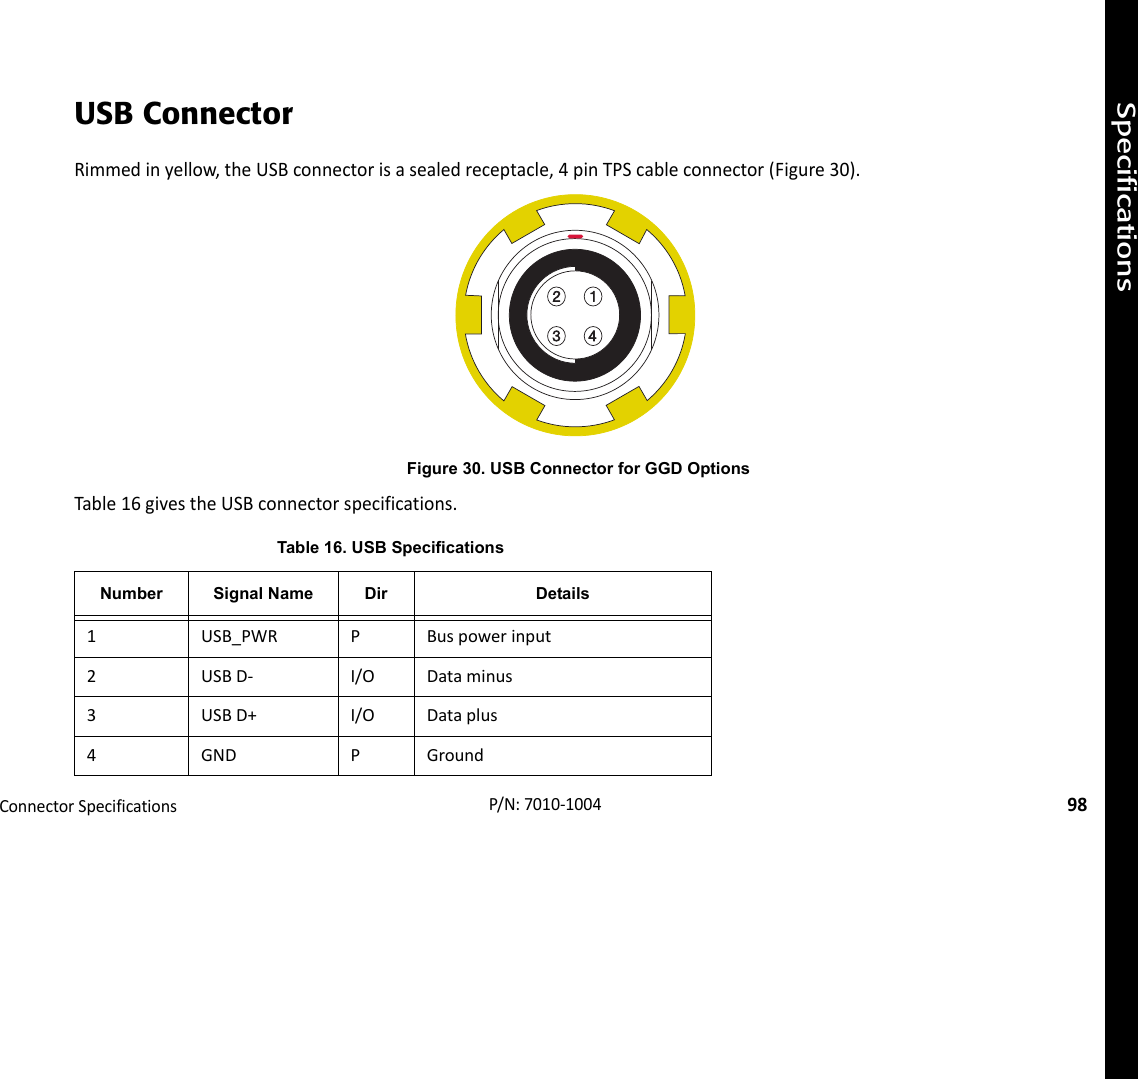 SpecificationsConnectorSpecifications98P/N:7010‐1004USB ConnectorRimmedinyellow,theUSBconnectorisasealedreceptacle,4pinTPScableconnector(Figure30).Figure 30. USB Connector for GGD OptionsTable16givestheUSBconnectorspecifications.Table 16. USB Specifications Number Signal Name Dir Details1USB_PWR PBuspowerinput2USBD‐ I/O Dataminus3USBD+ I/O Dataplus4GND PGround123 4